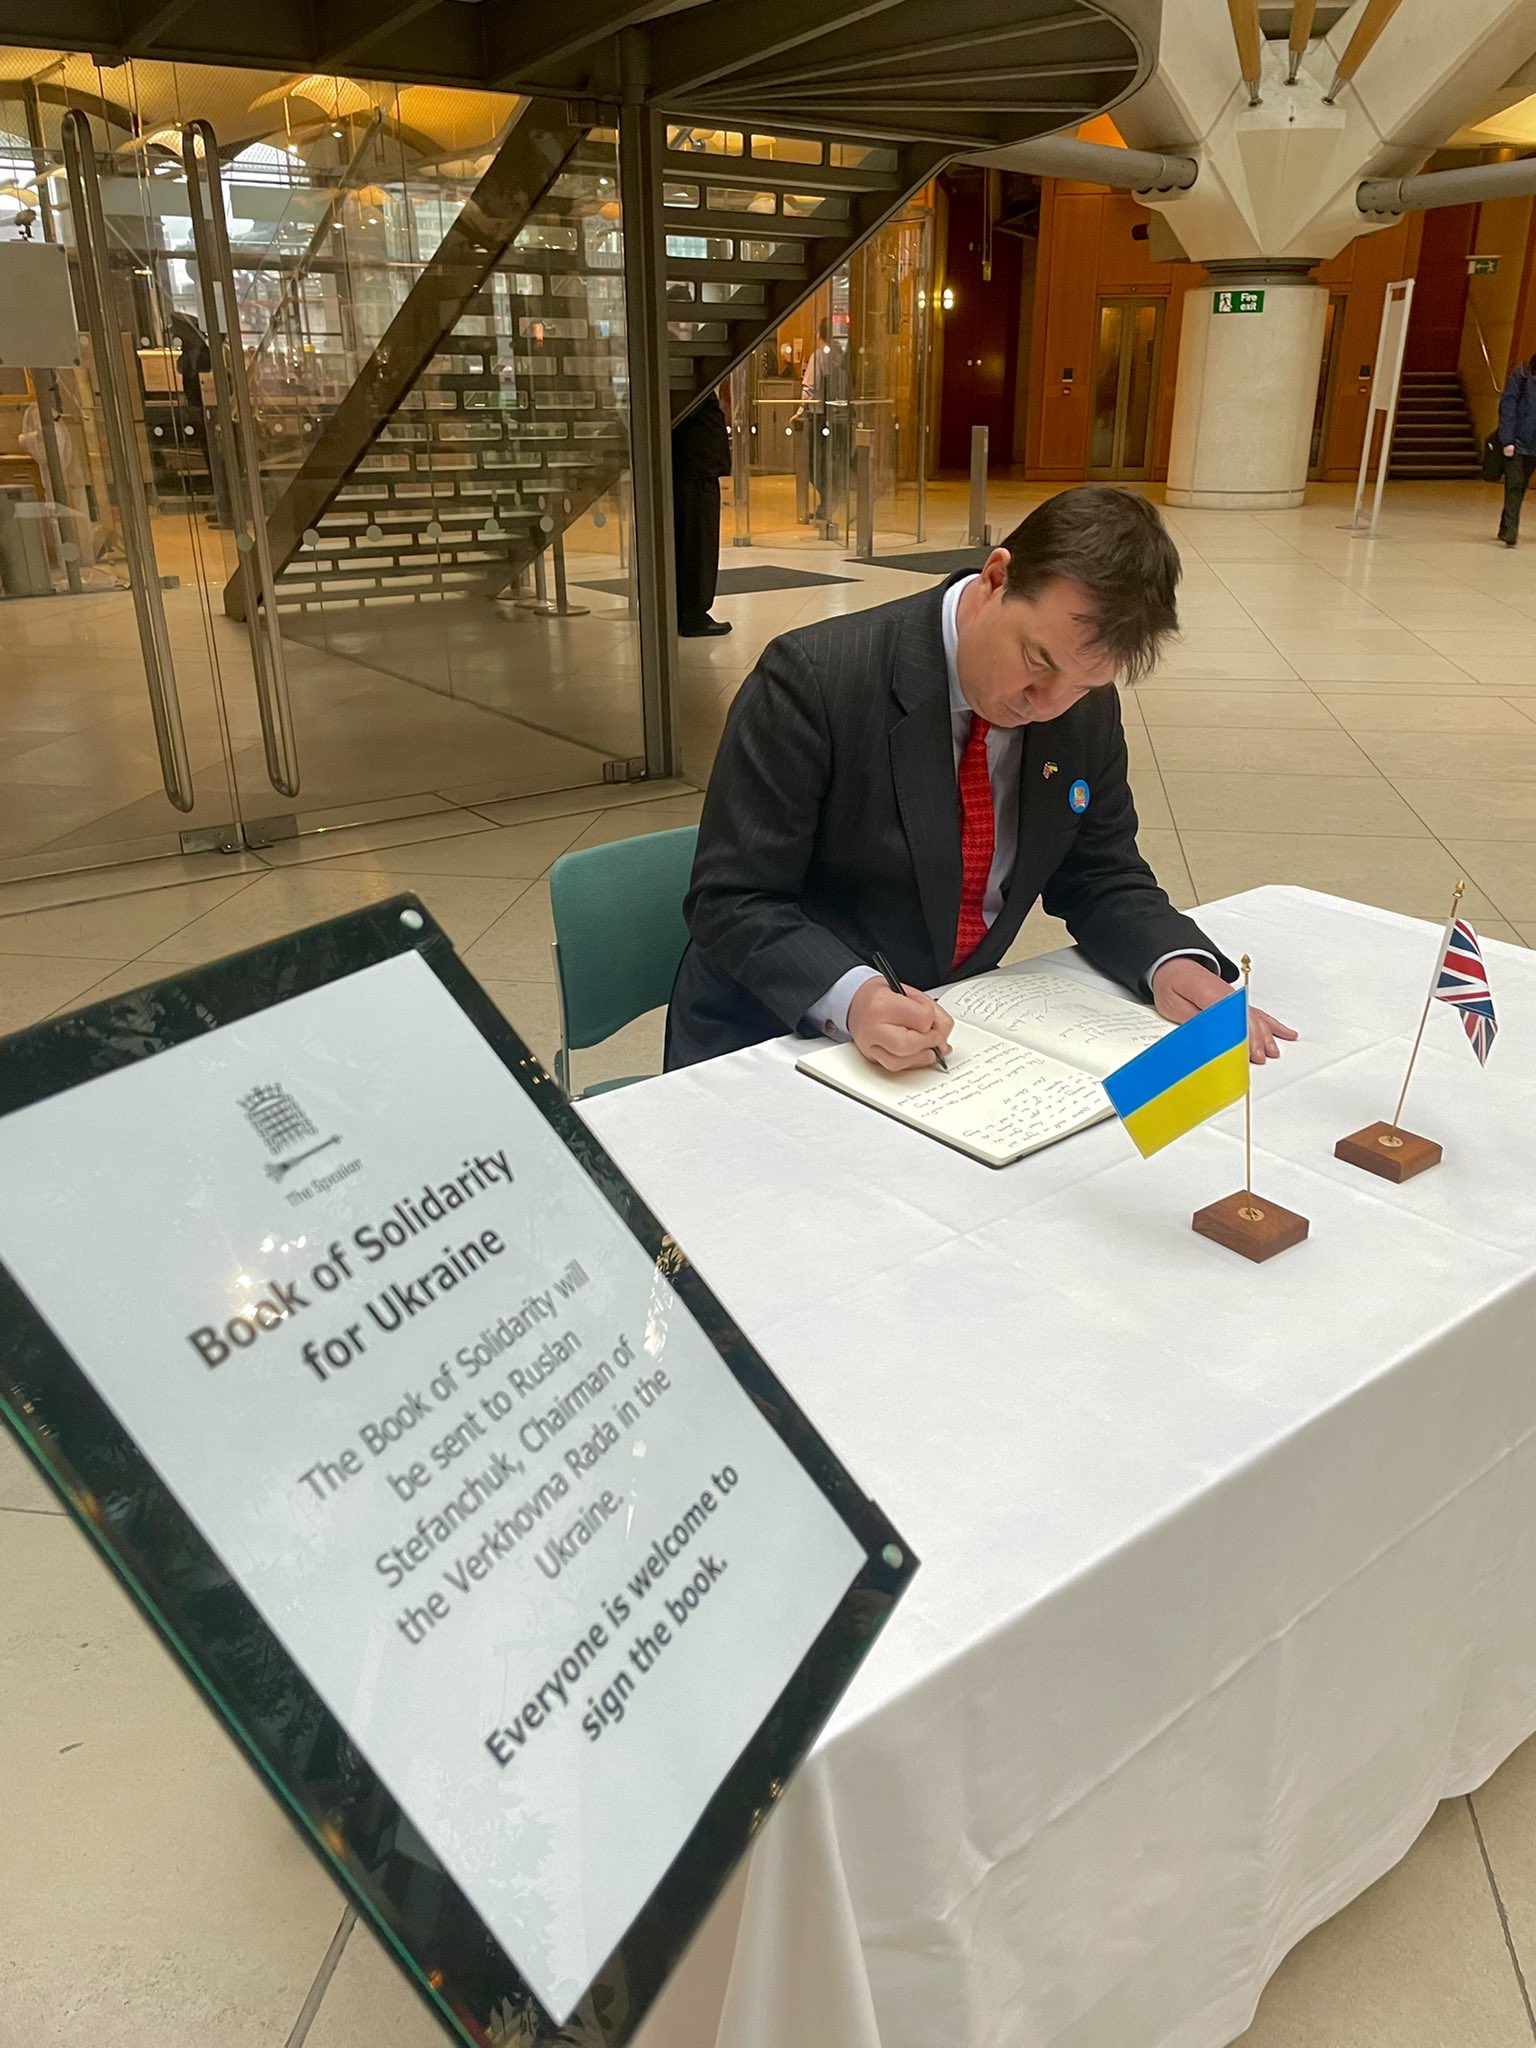 Guy Opperman MP signs a book of solidarity for Ukraine